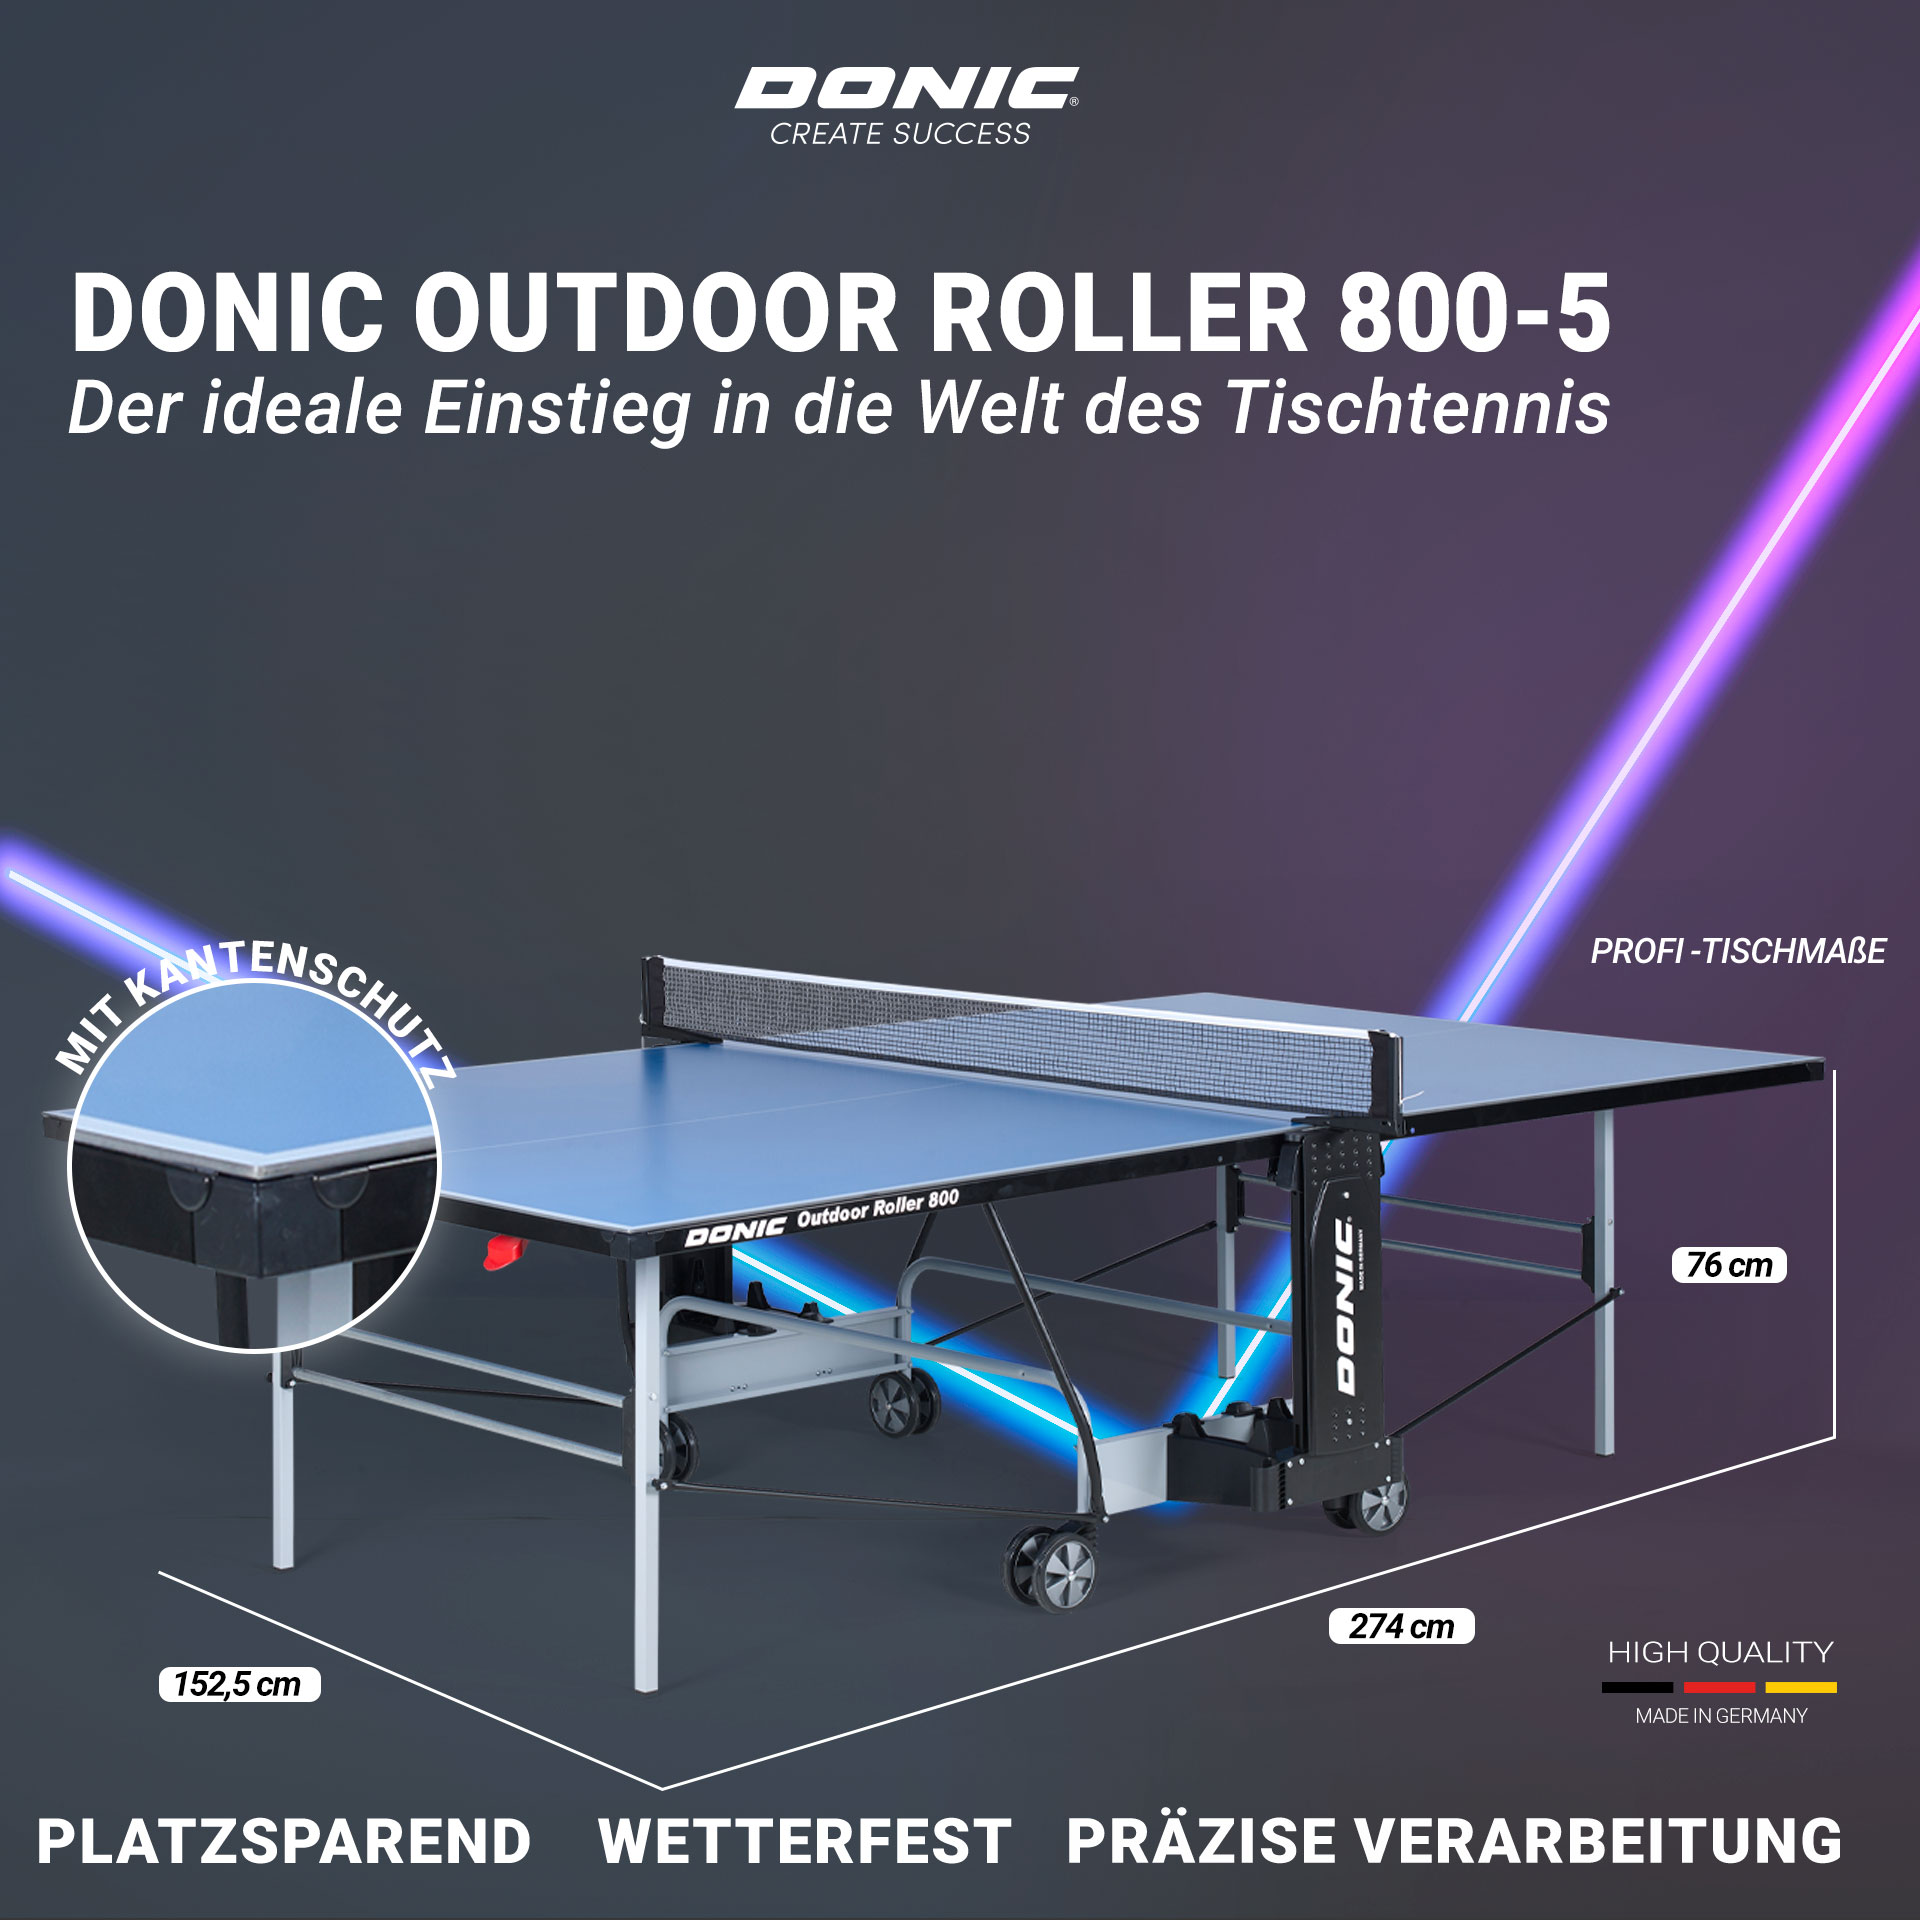 CREATE Outdoor -5 Roller | 800 SUCCESS Donic